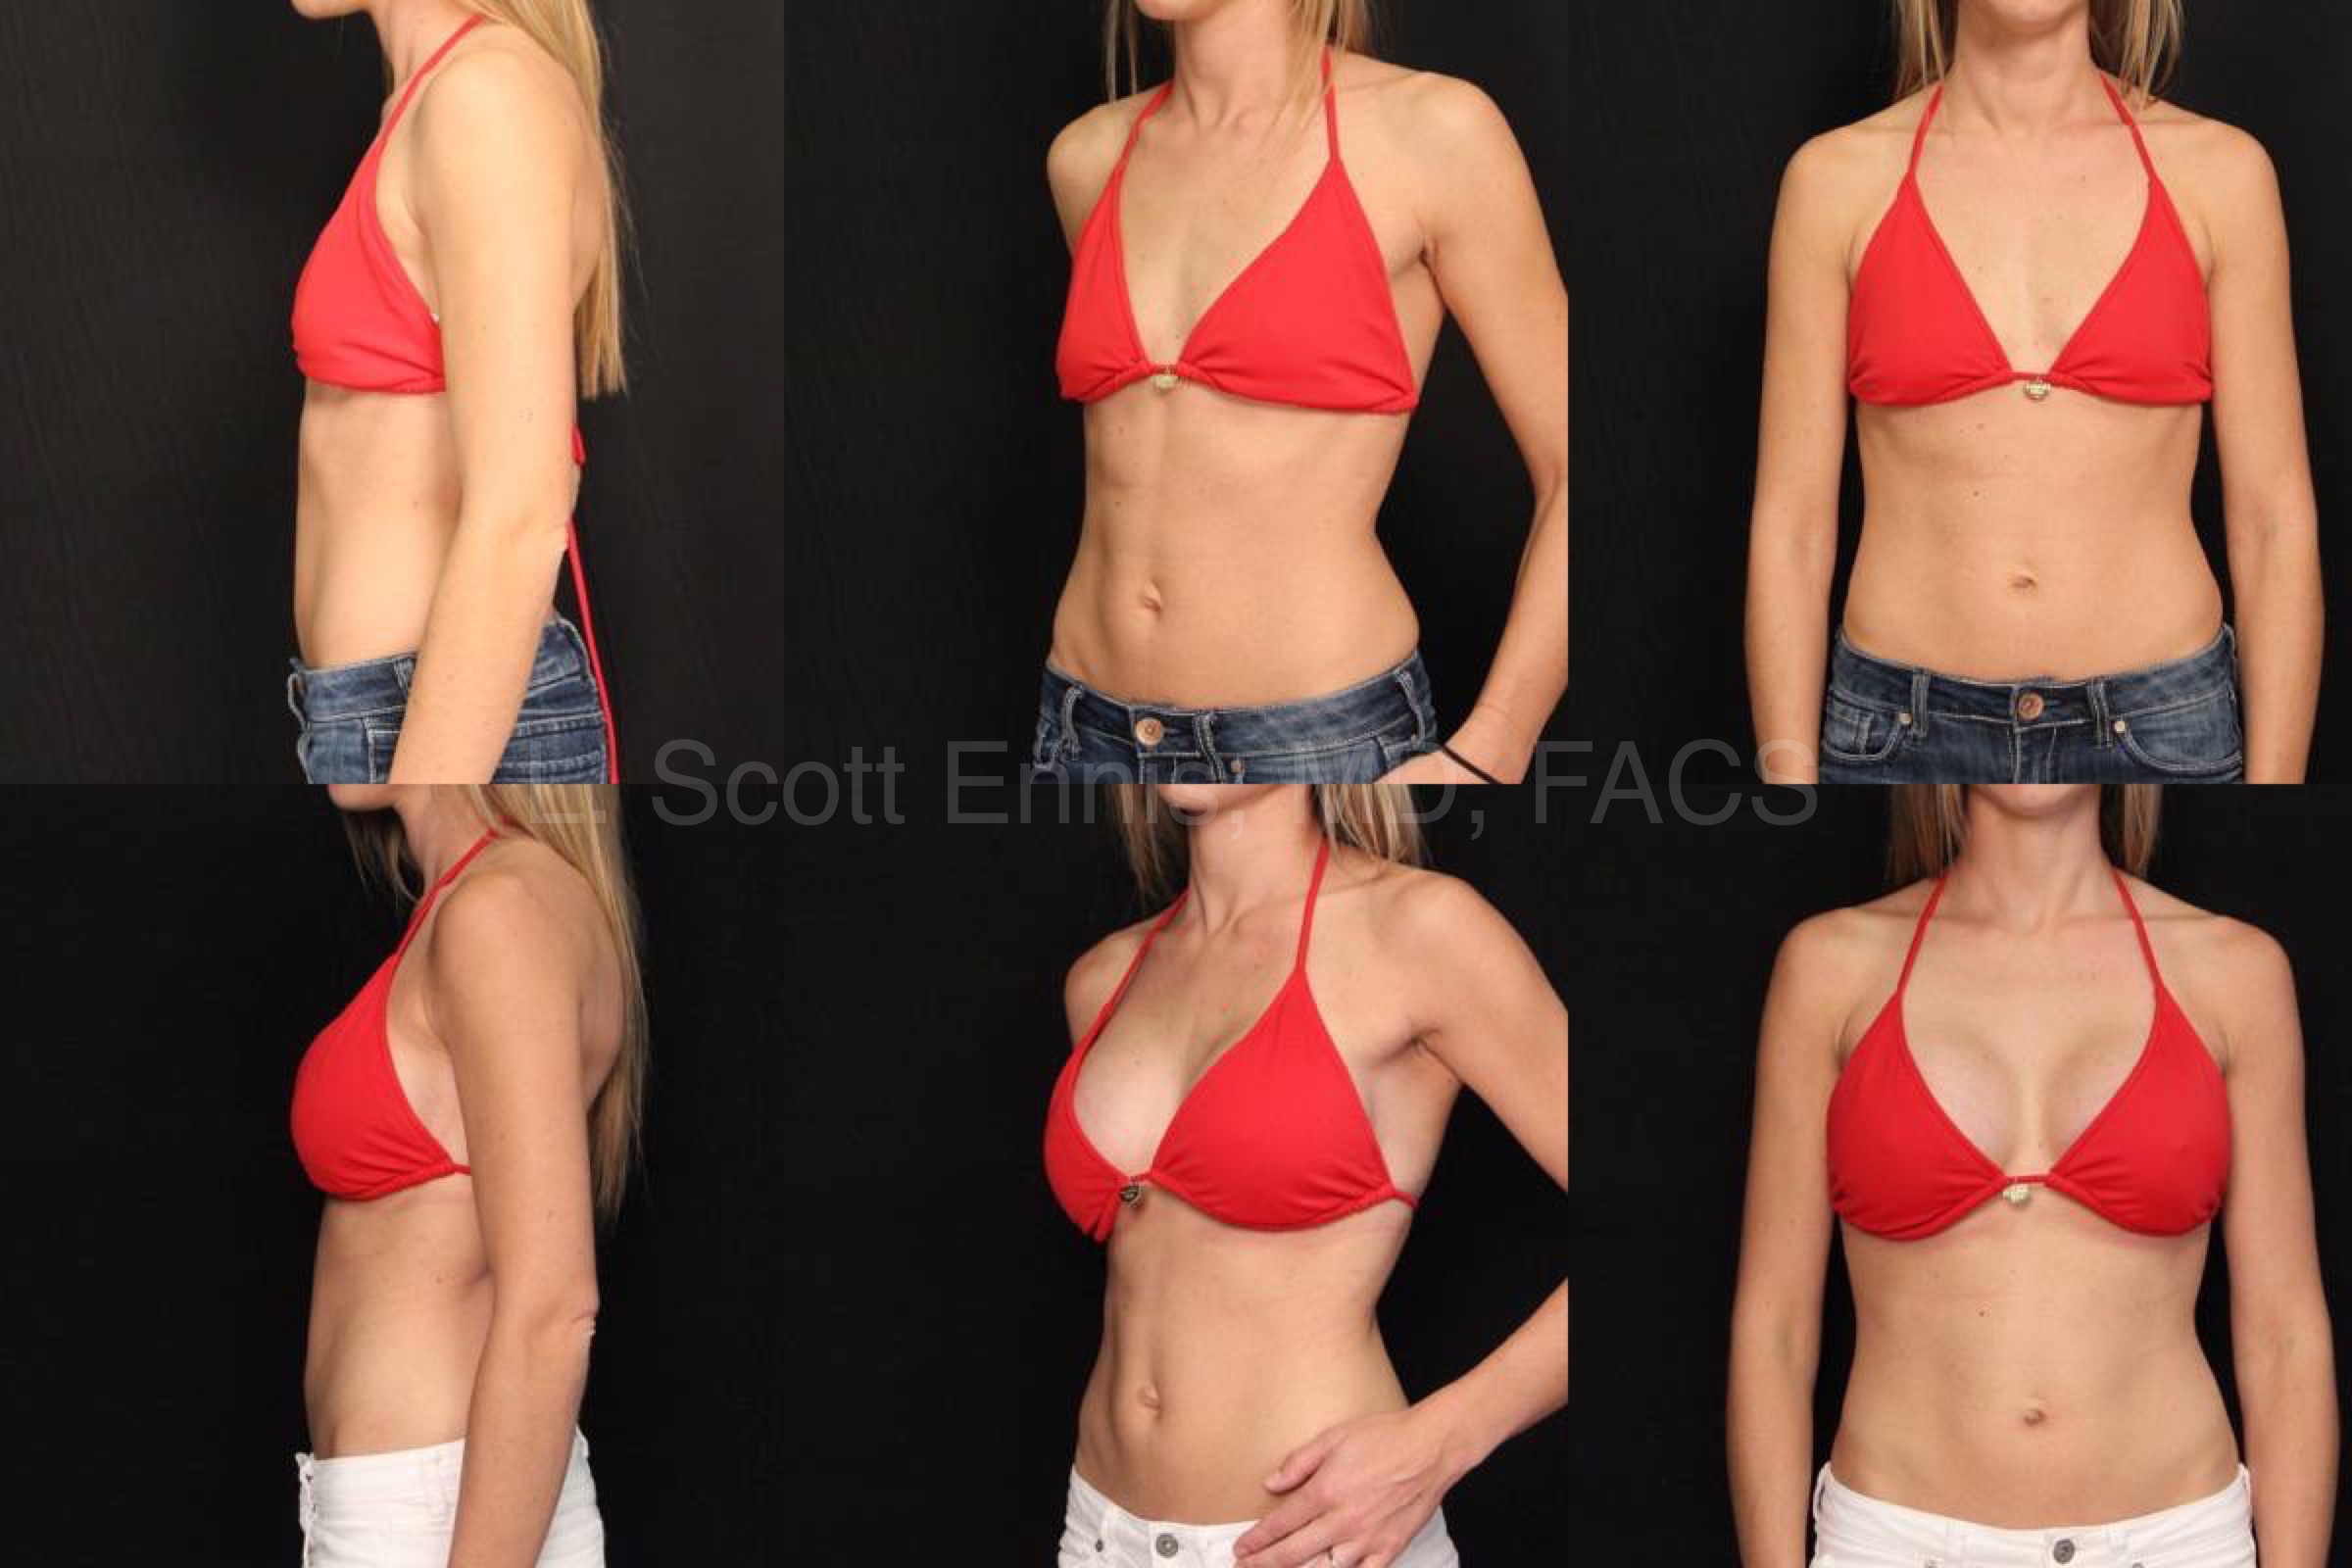 How Breast Augmentation Affects the Gap between Your Breasts